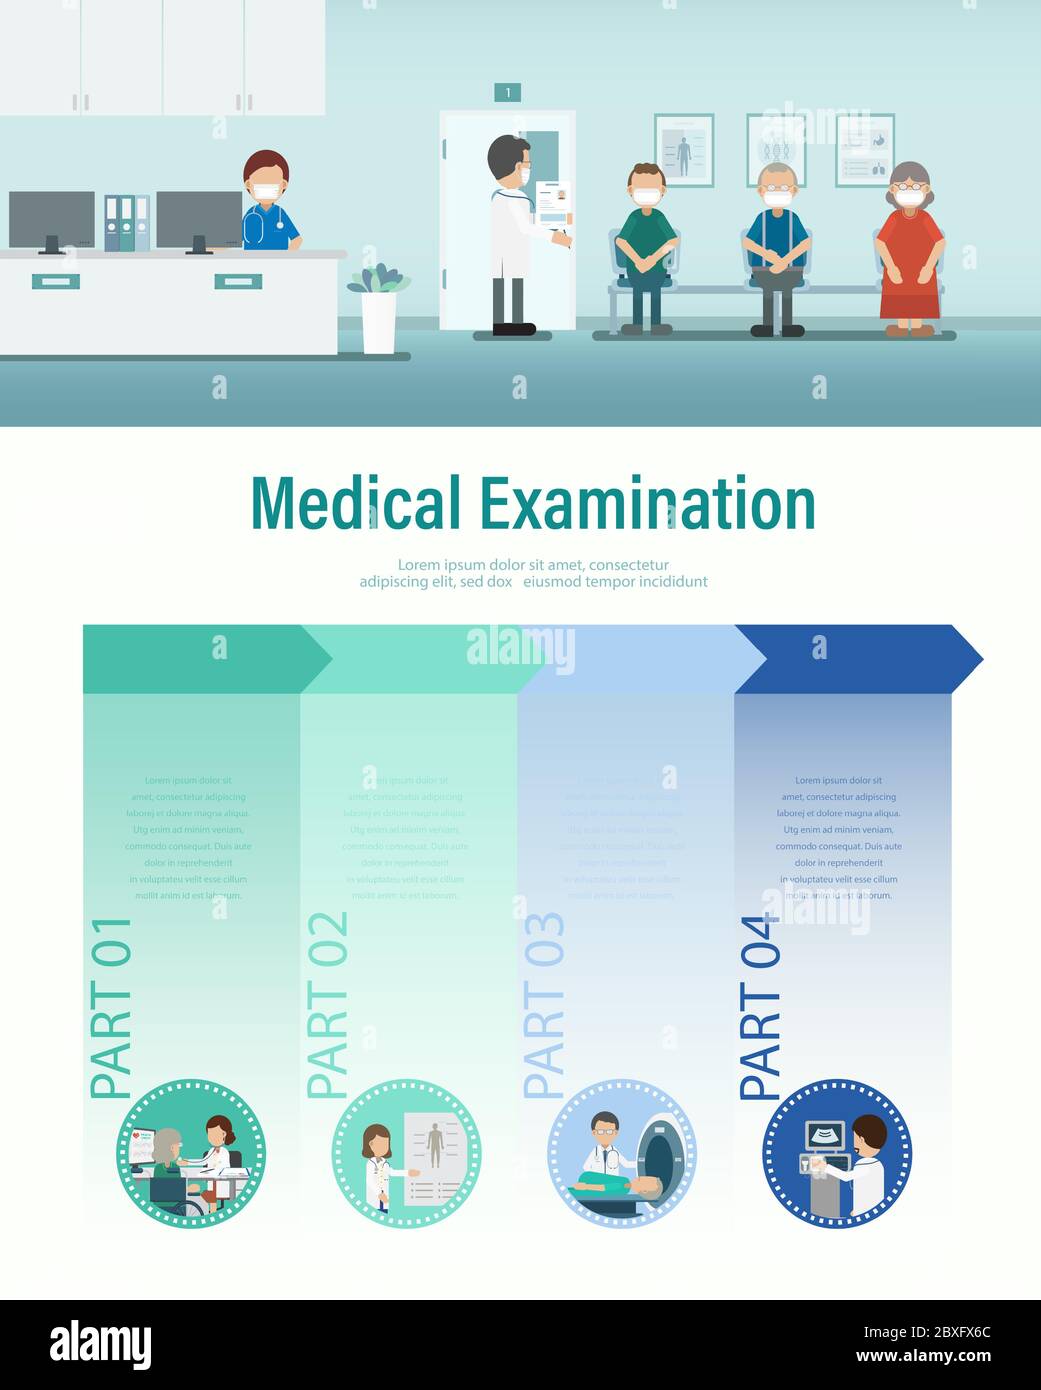 Medical examination infographic with doctors and patients  flat design vector illustration Stock Vector